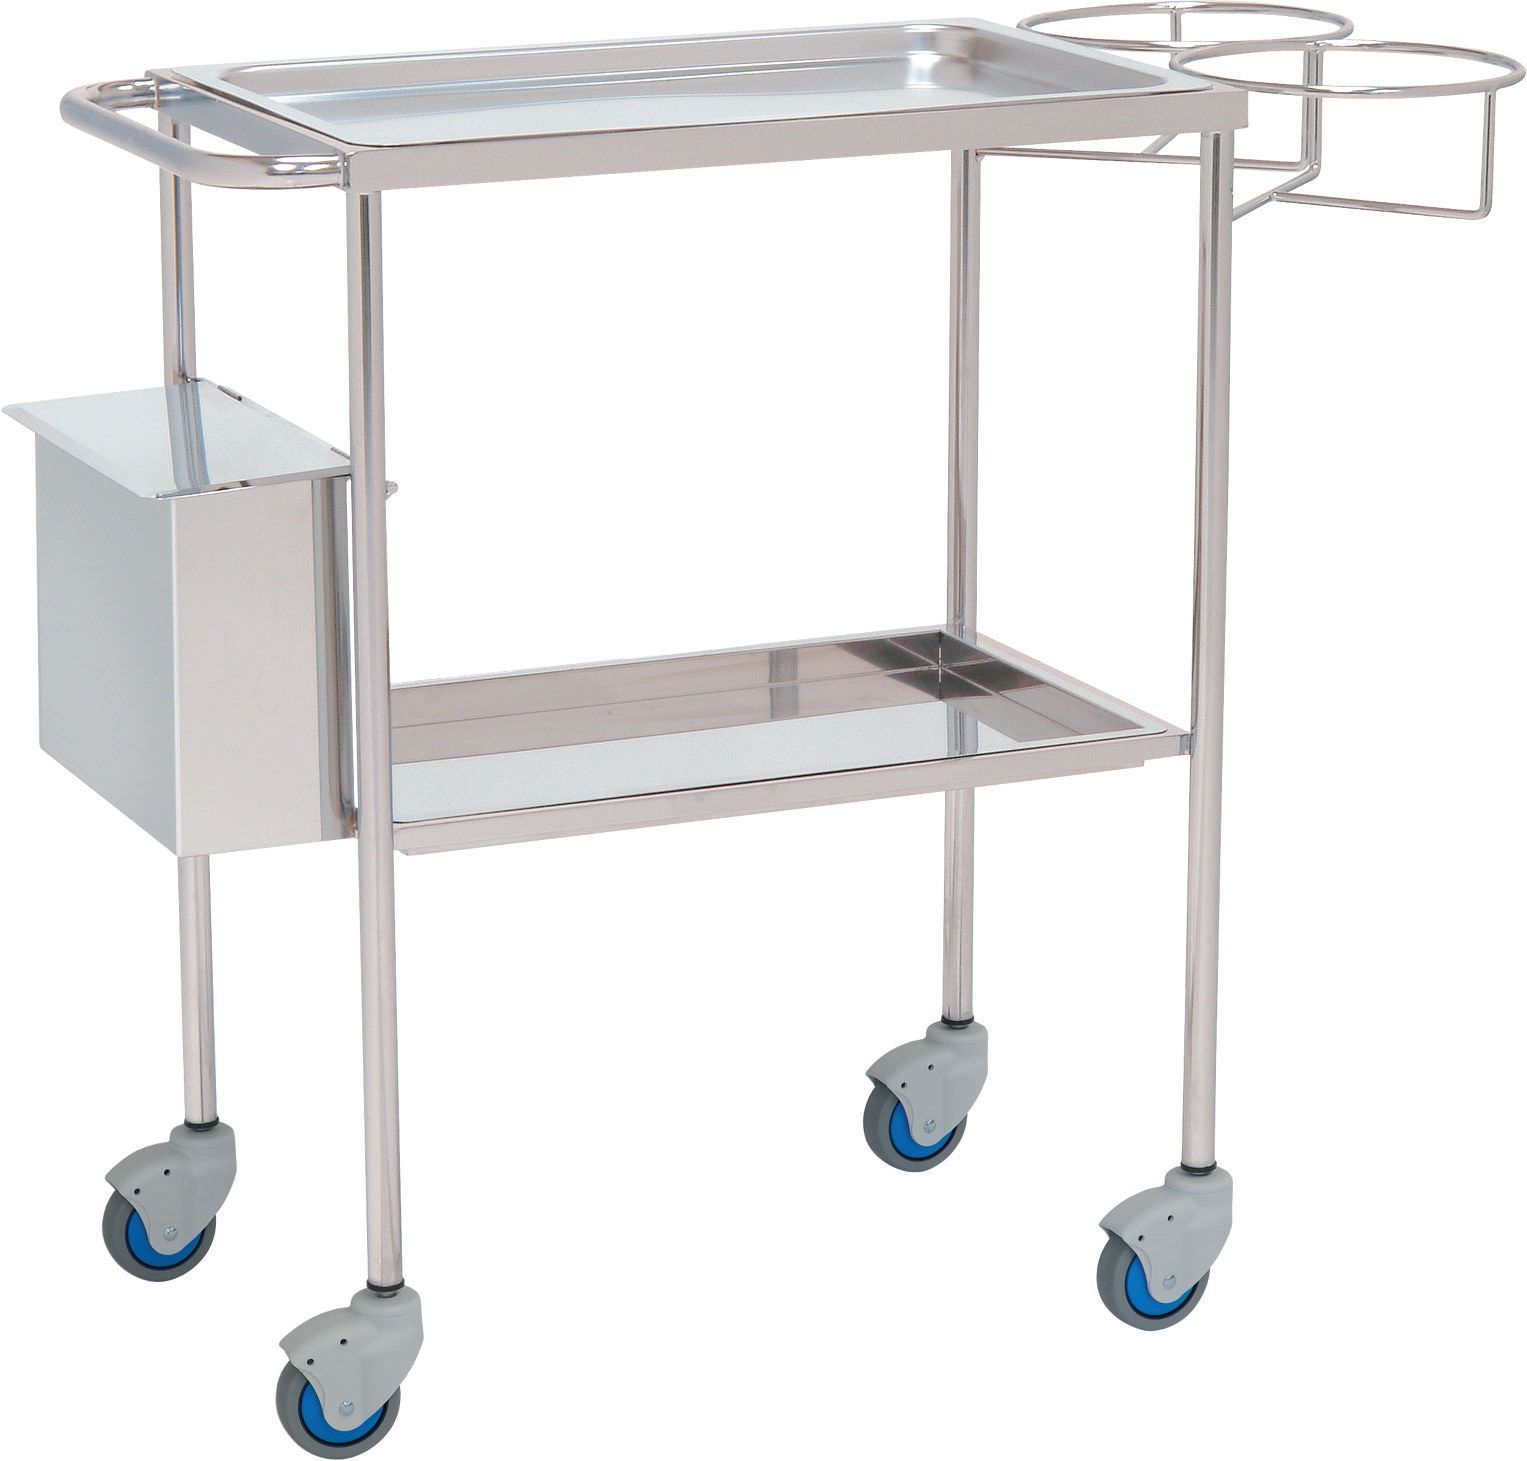 Treatment trolley / stainless steel / 2-tray 10157 Inmoclinc